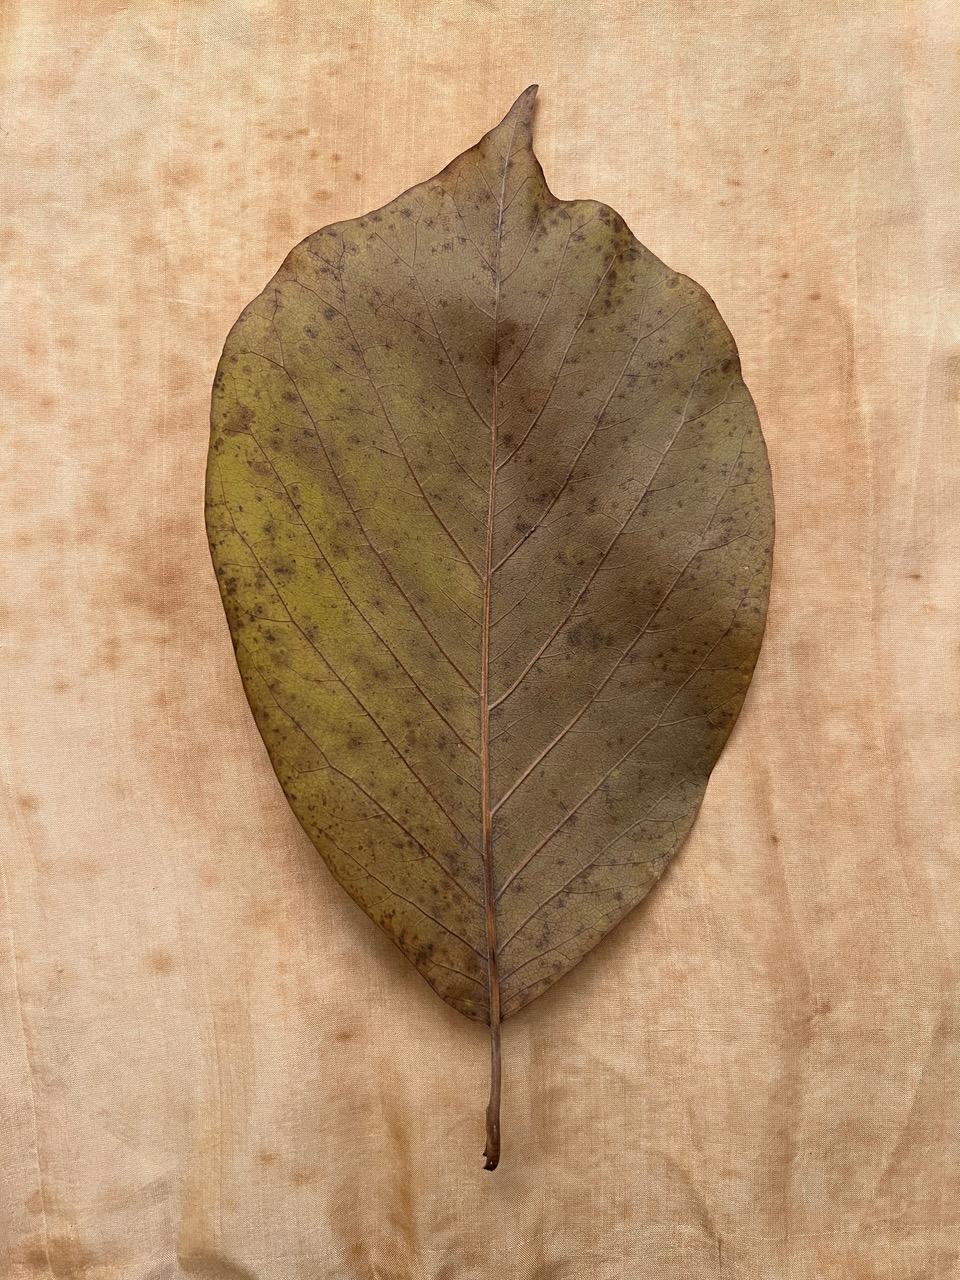 Untitled #1940 from "Leaves" series: nature still-life leaf photograph w/ green